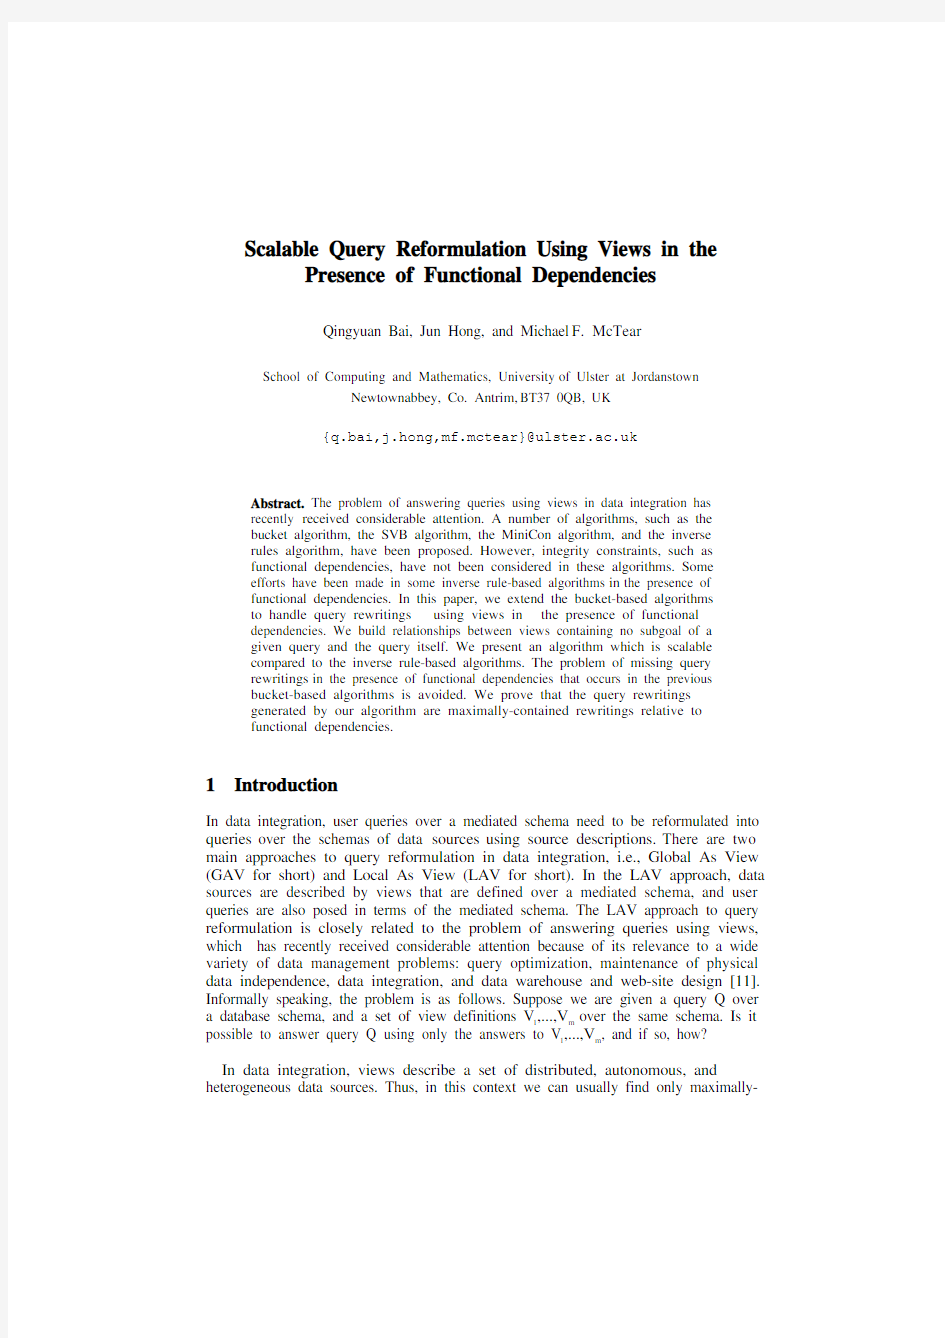 Scalable Query Reformulation Using Views in the Presence of Functional Dependencies